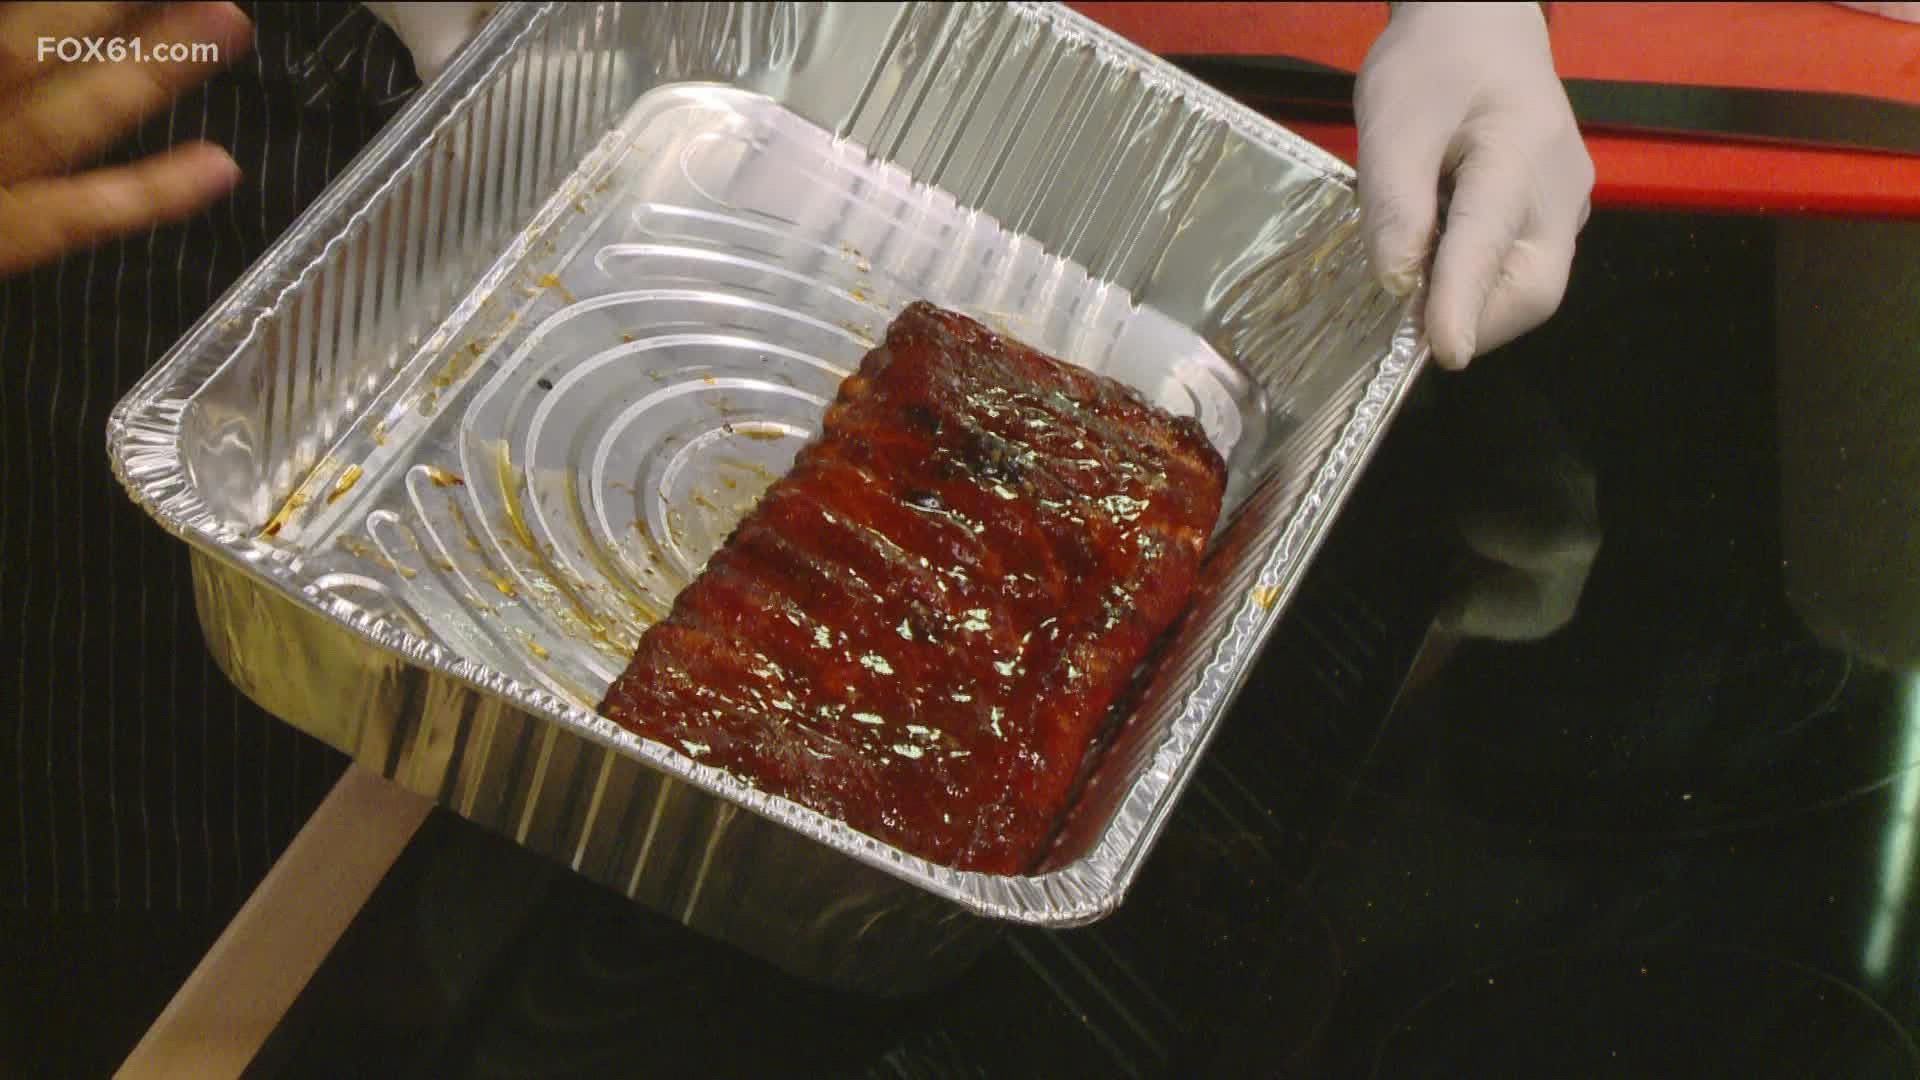 Chris Herbette with Backyard Smokers in Ledyard shows us all we need to know about BBQ spare ribs!